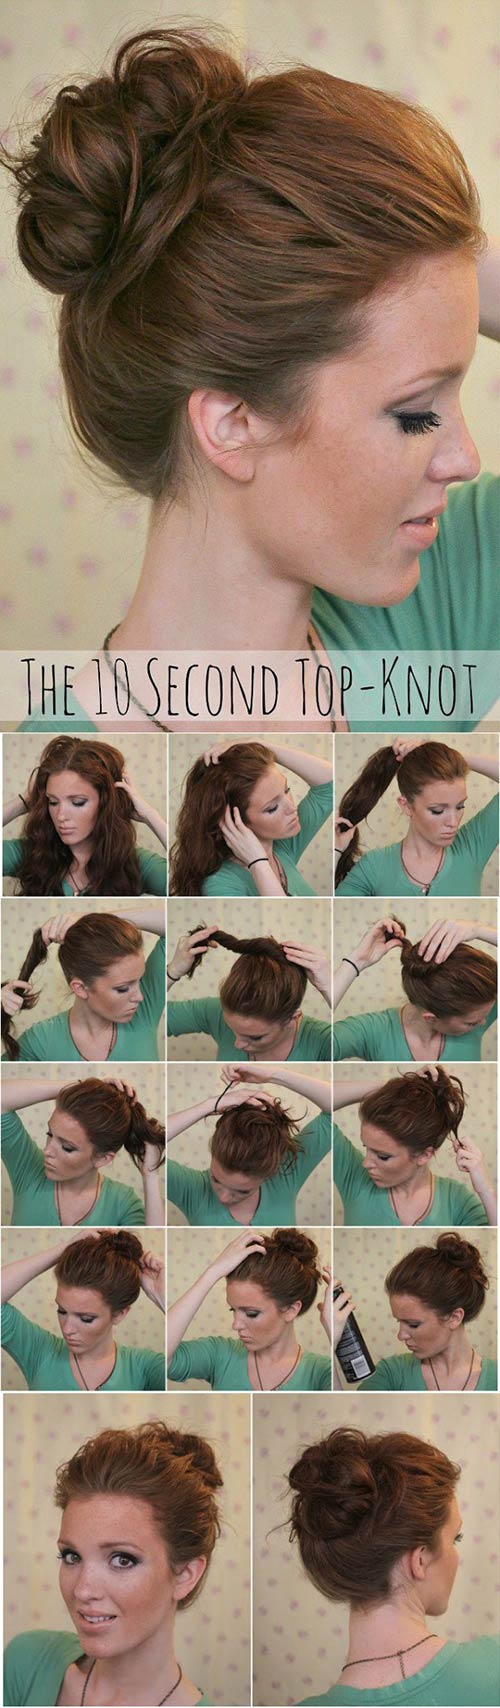 Top knot hairstyle tutorial for girls with long hair